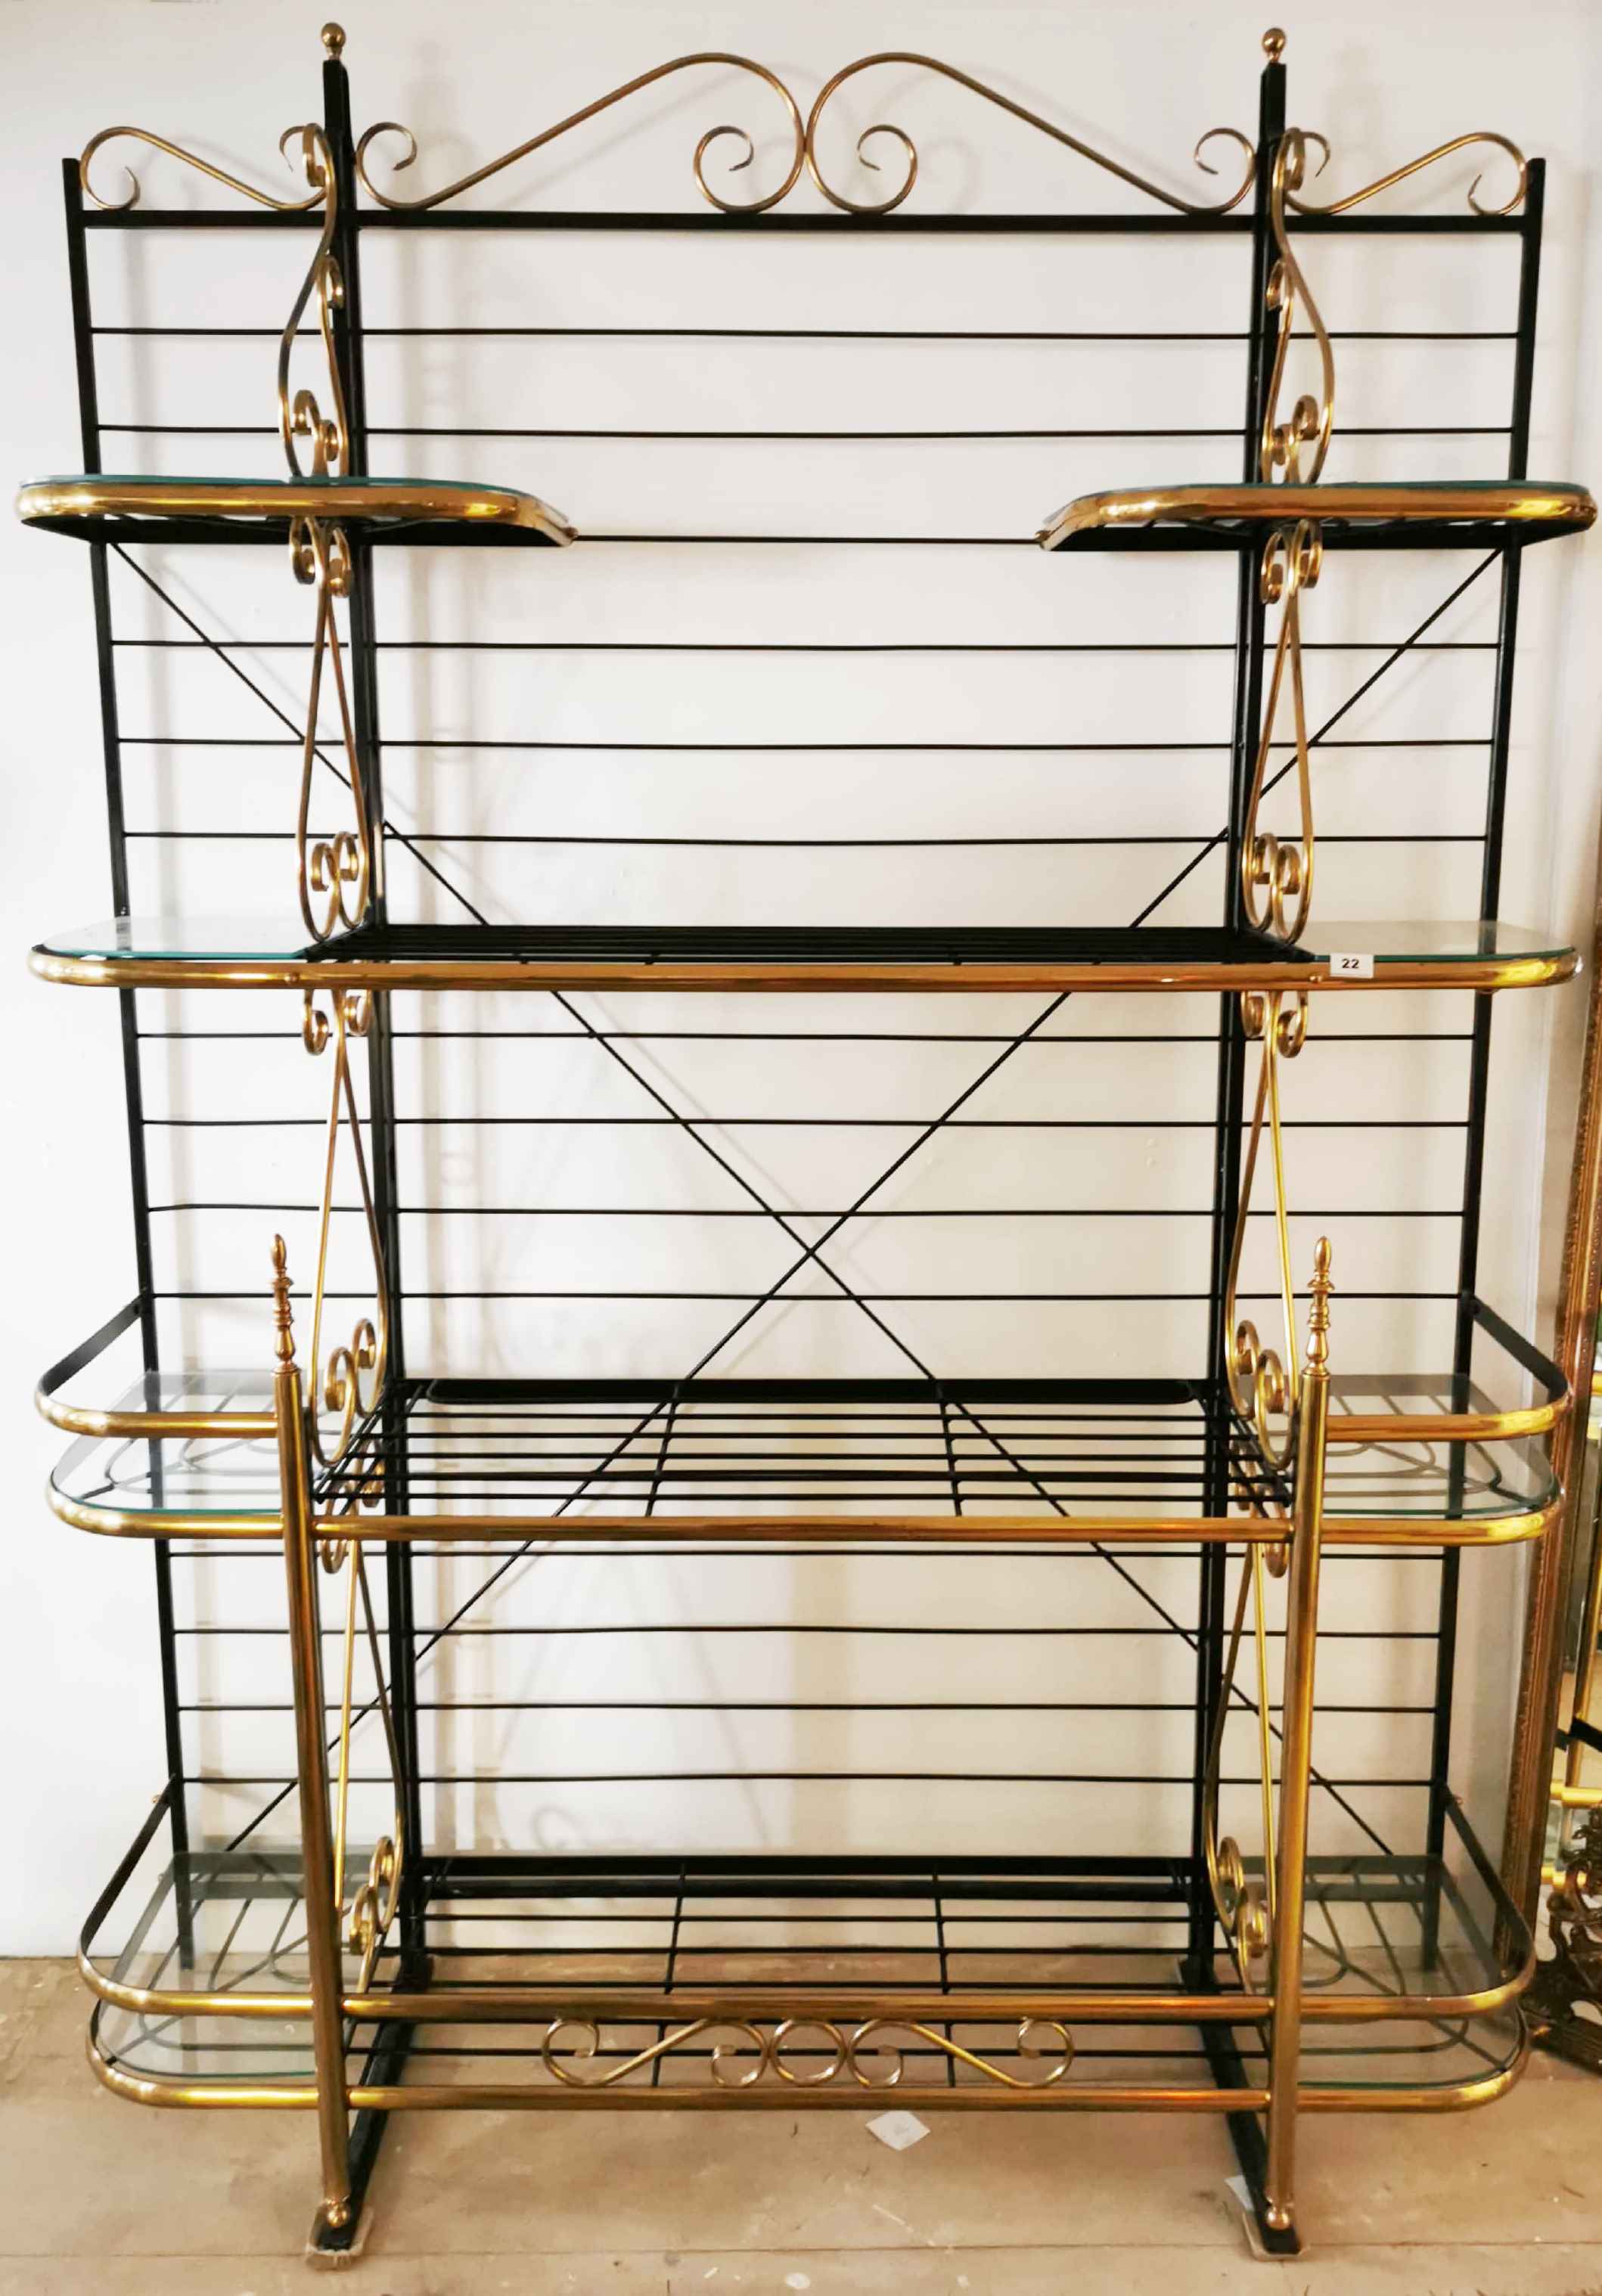 A superb large gilt brass painted metal and glass baker's rack shelving unit, W. 148cm x H. 220cm.